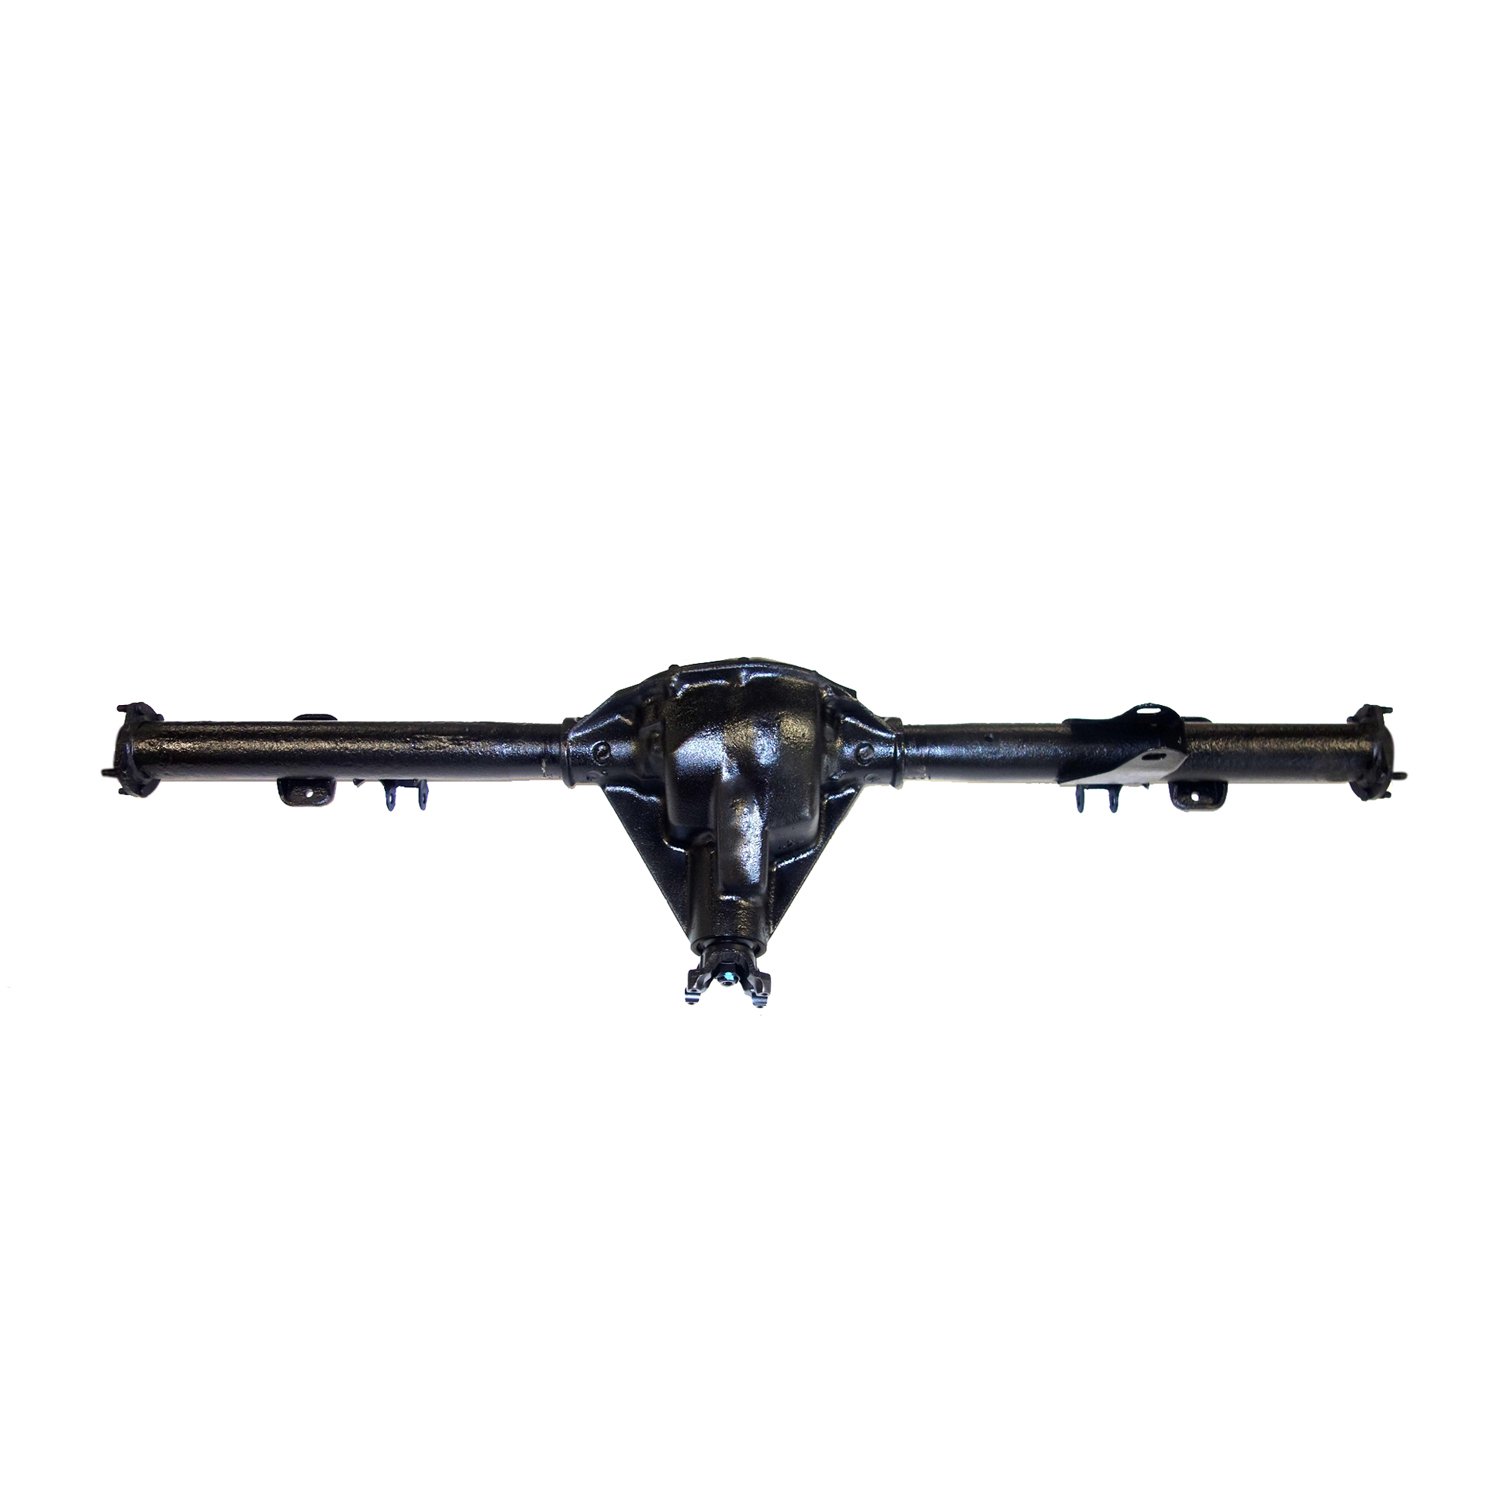 Remanufactured Axle Assy for Dana 35 93-95 Grand